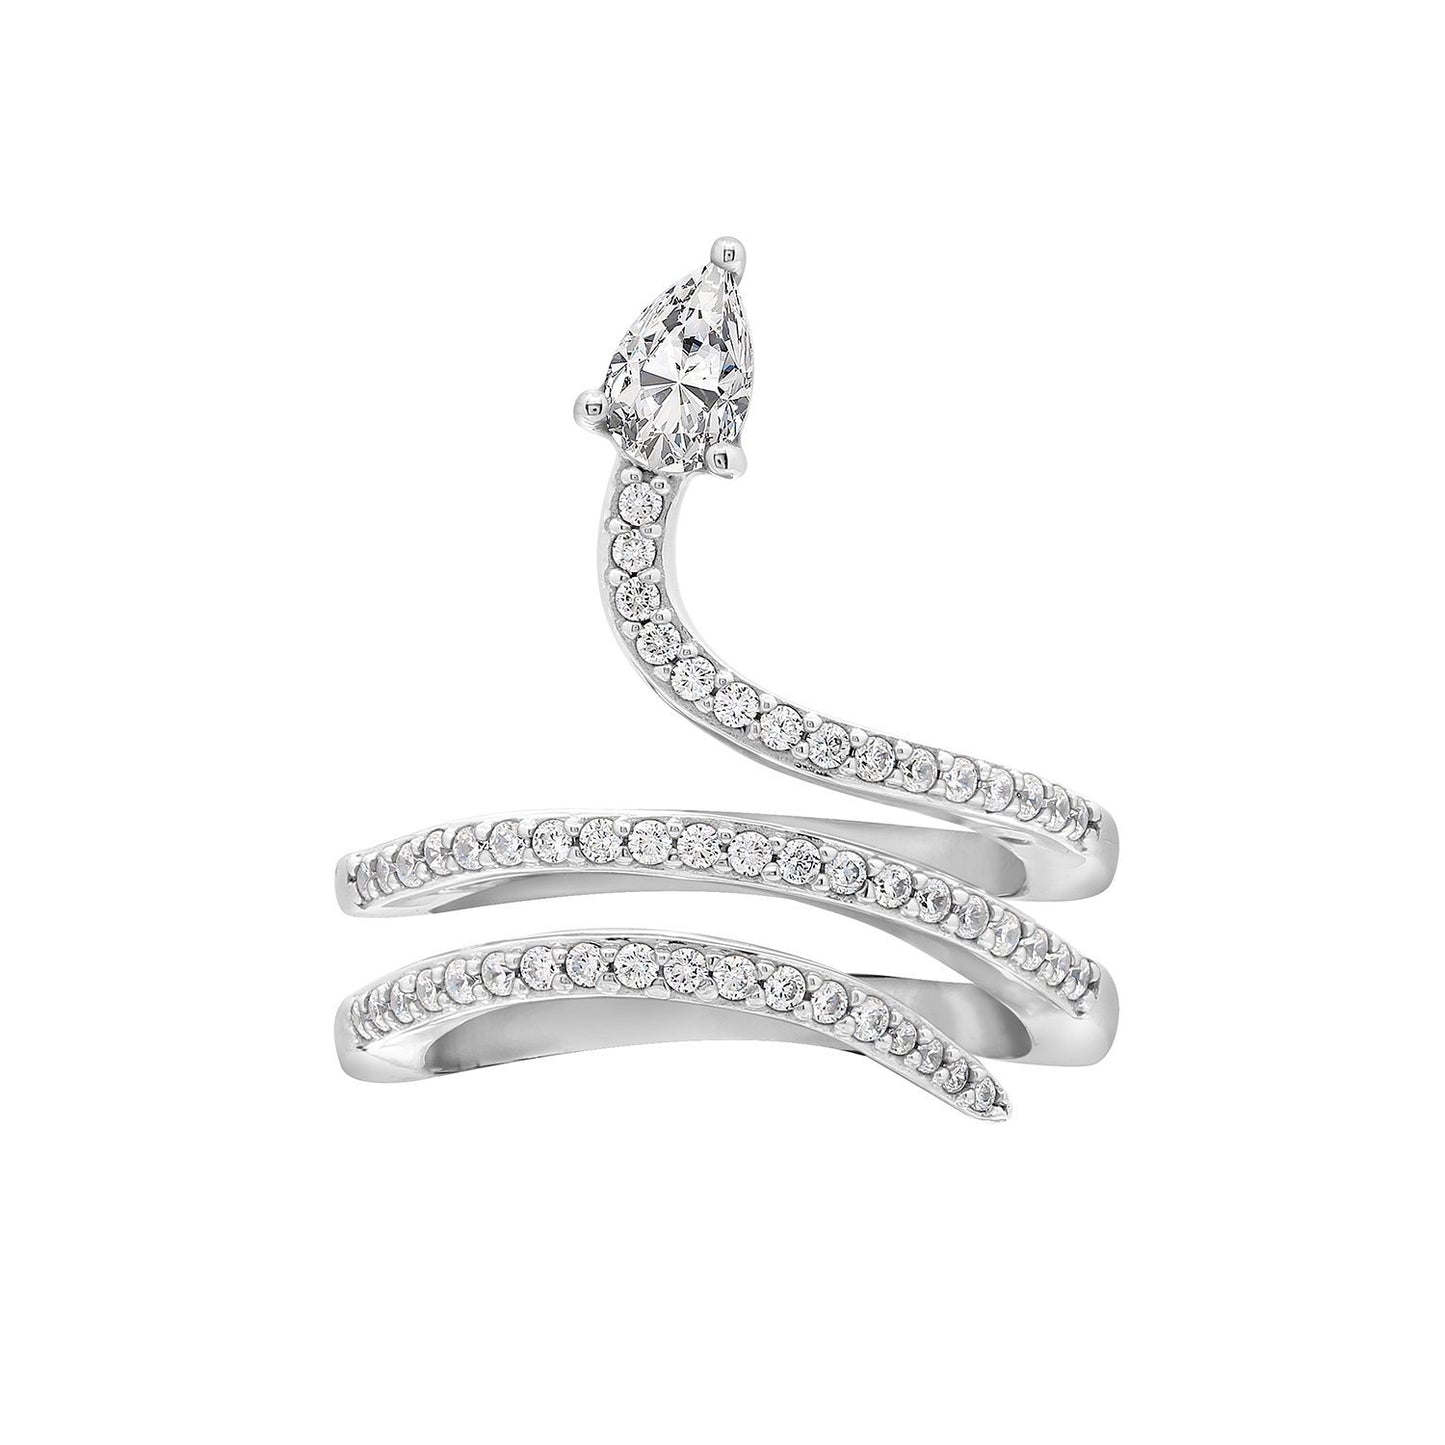 KIERA NEW YORK Sterling Silver Cubic Zirconia Coiled Snake Ring